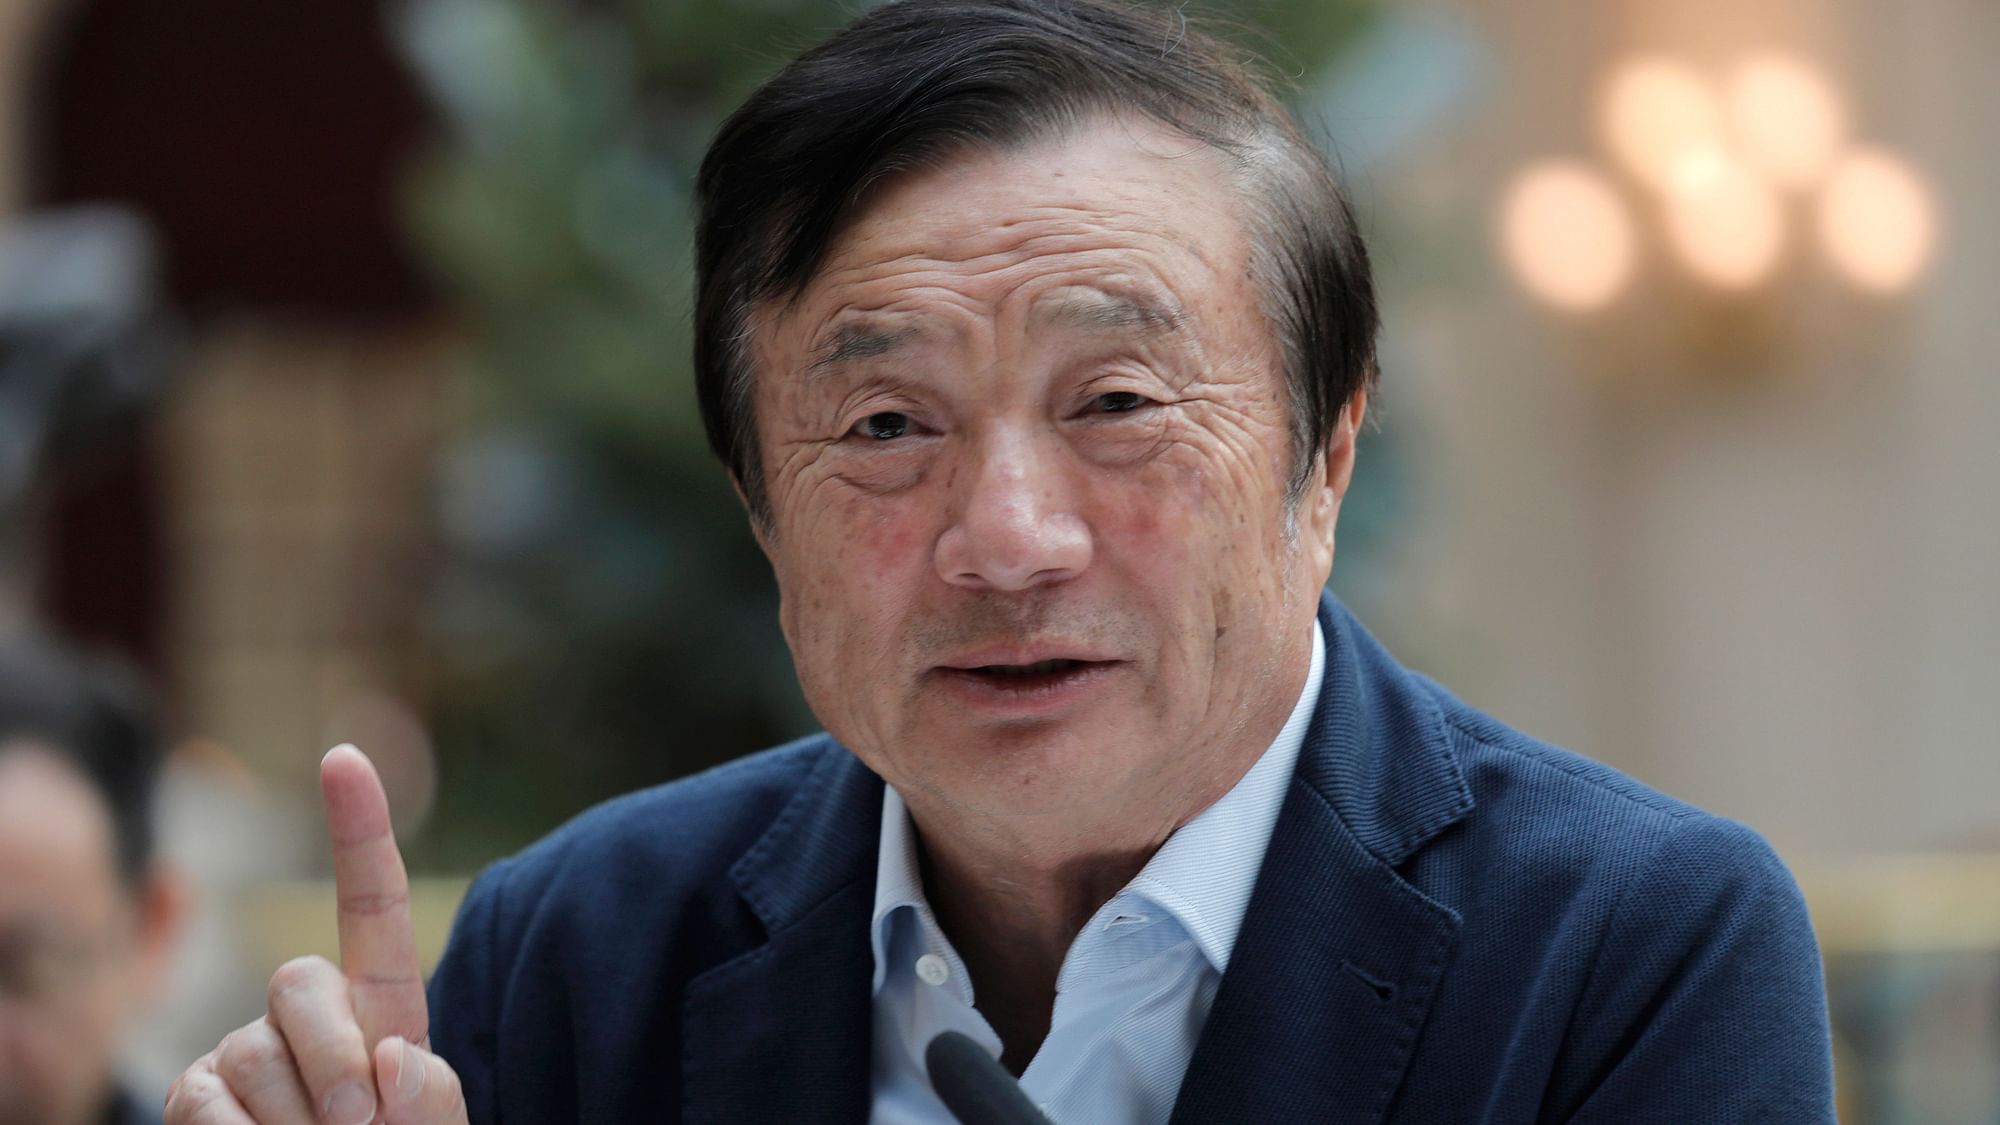 Ren Zhengfei, founder and CEO of Huawei, gestures during a round table meeting with the media in Shenzhen city, south China’s Guangdong province, Tuesday, 15 January, 2019.